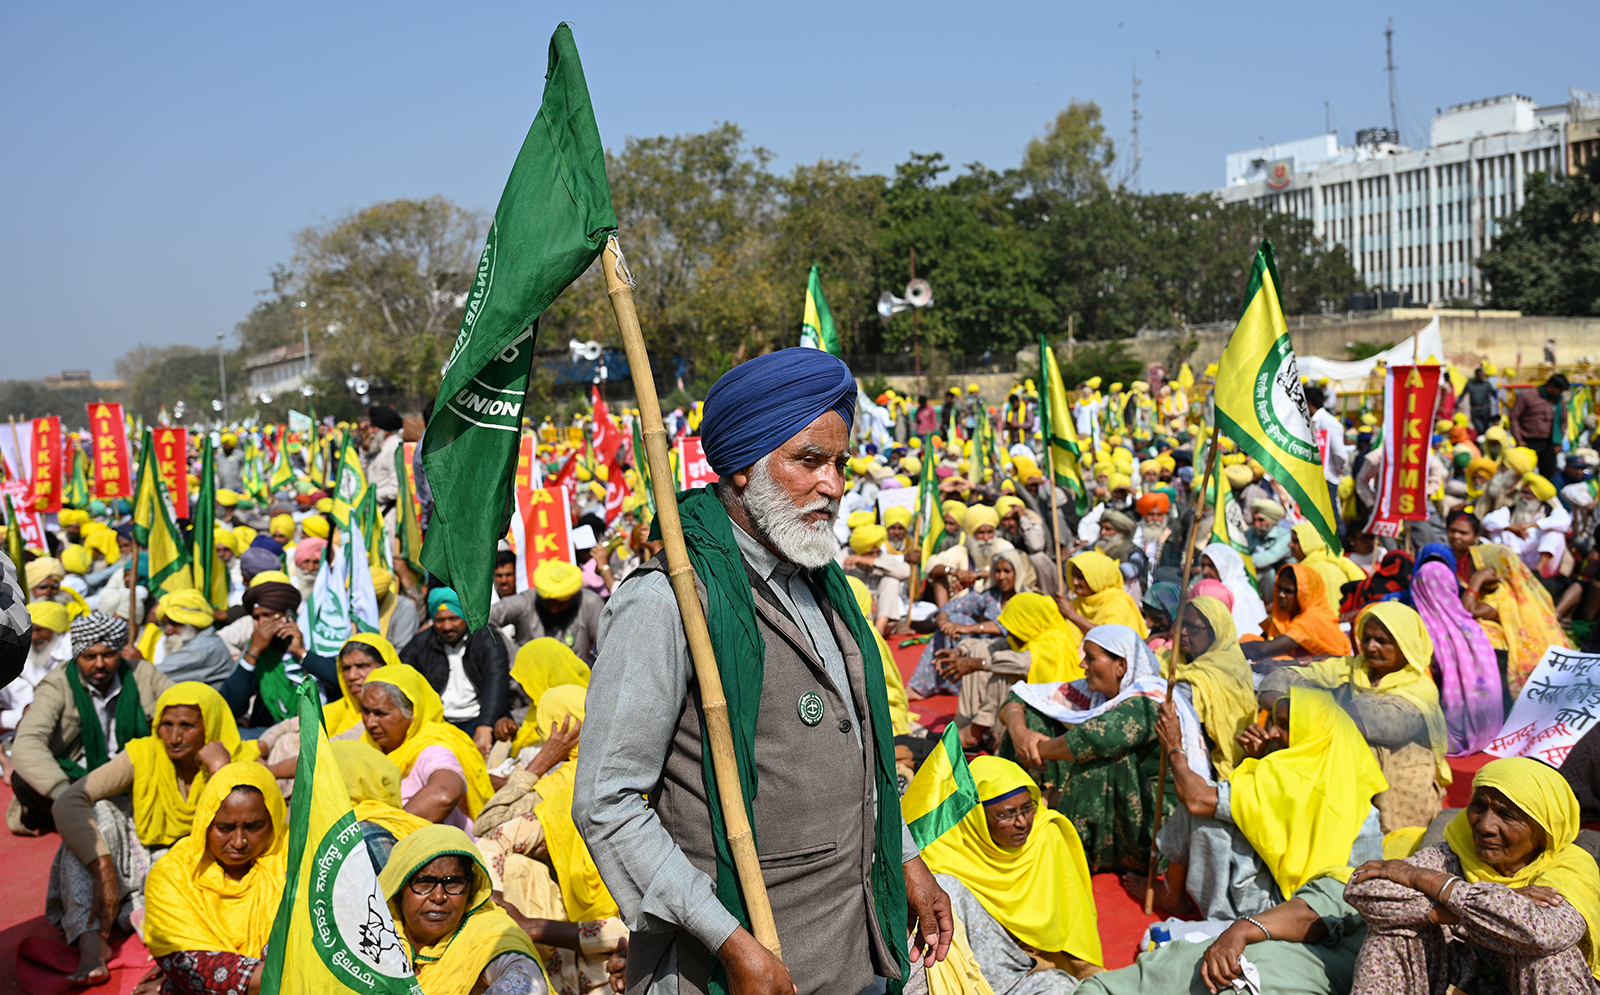 Farmers from all over India gather at Ramlila Maidan during a protest on March 14, in New Delhi.